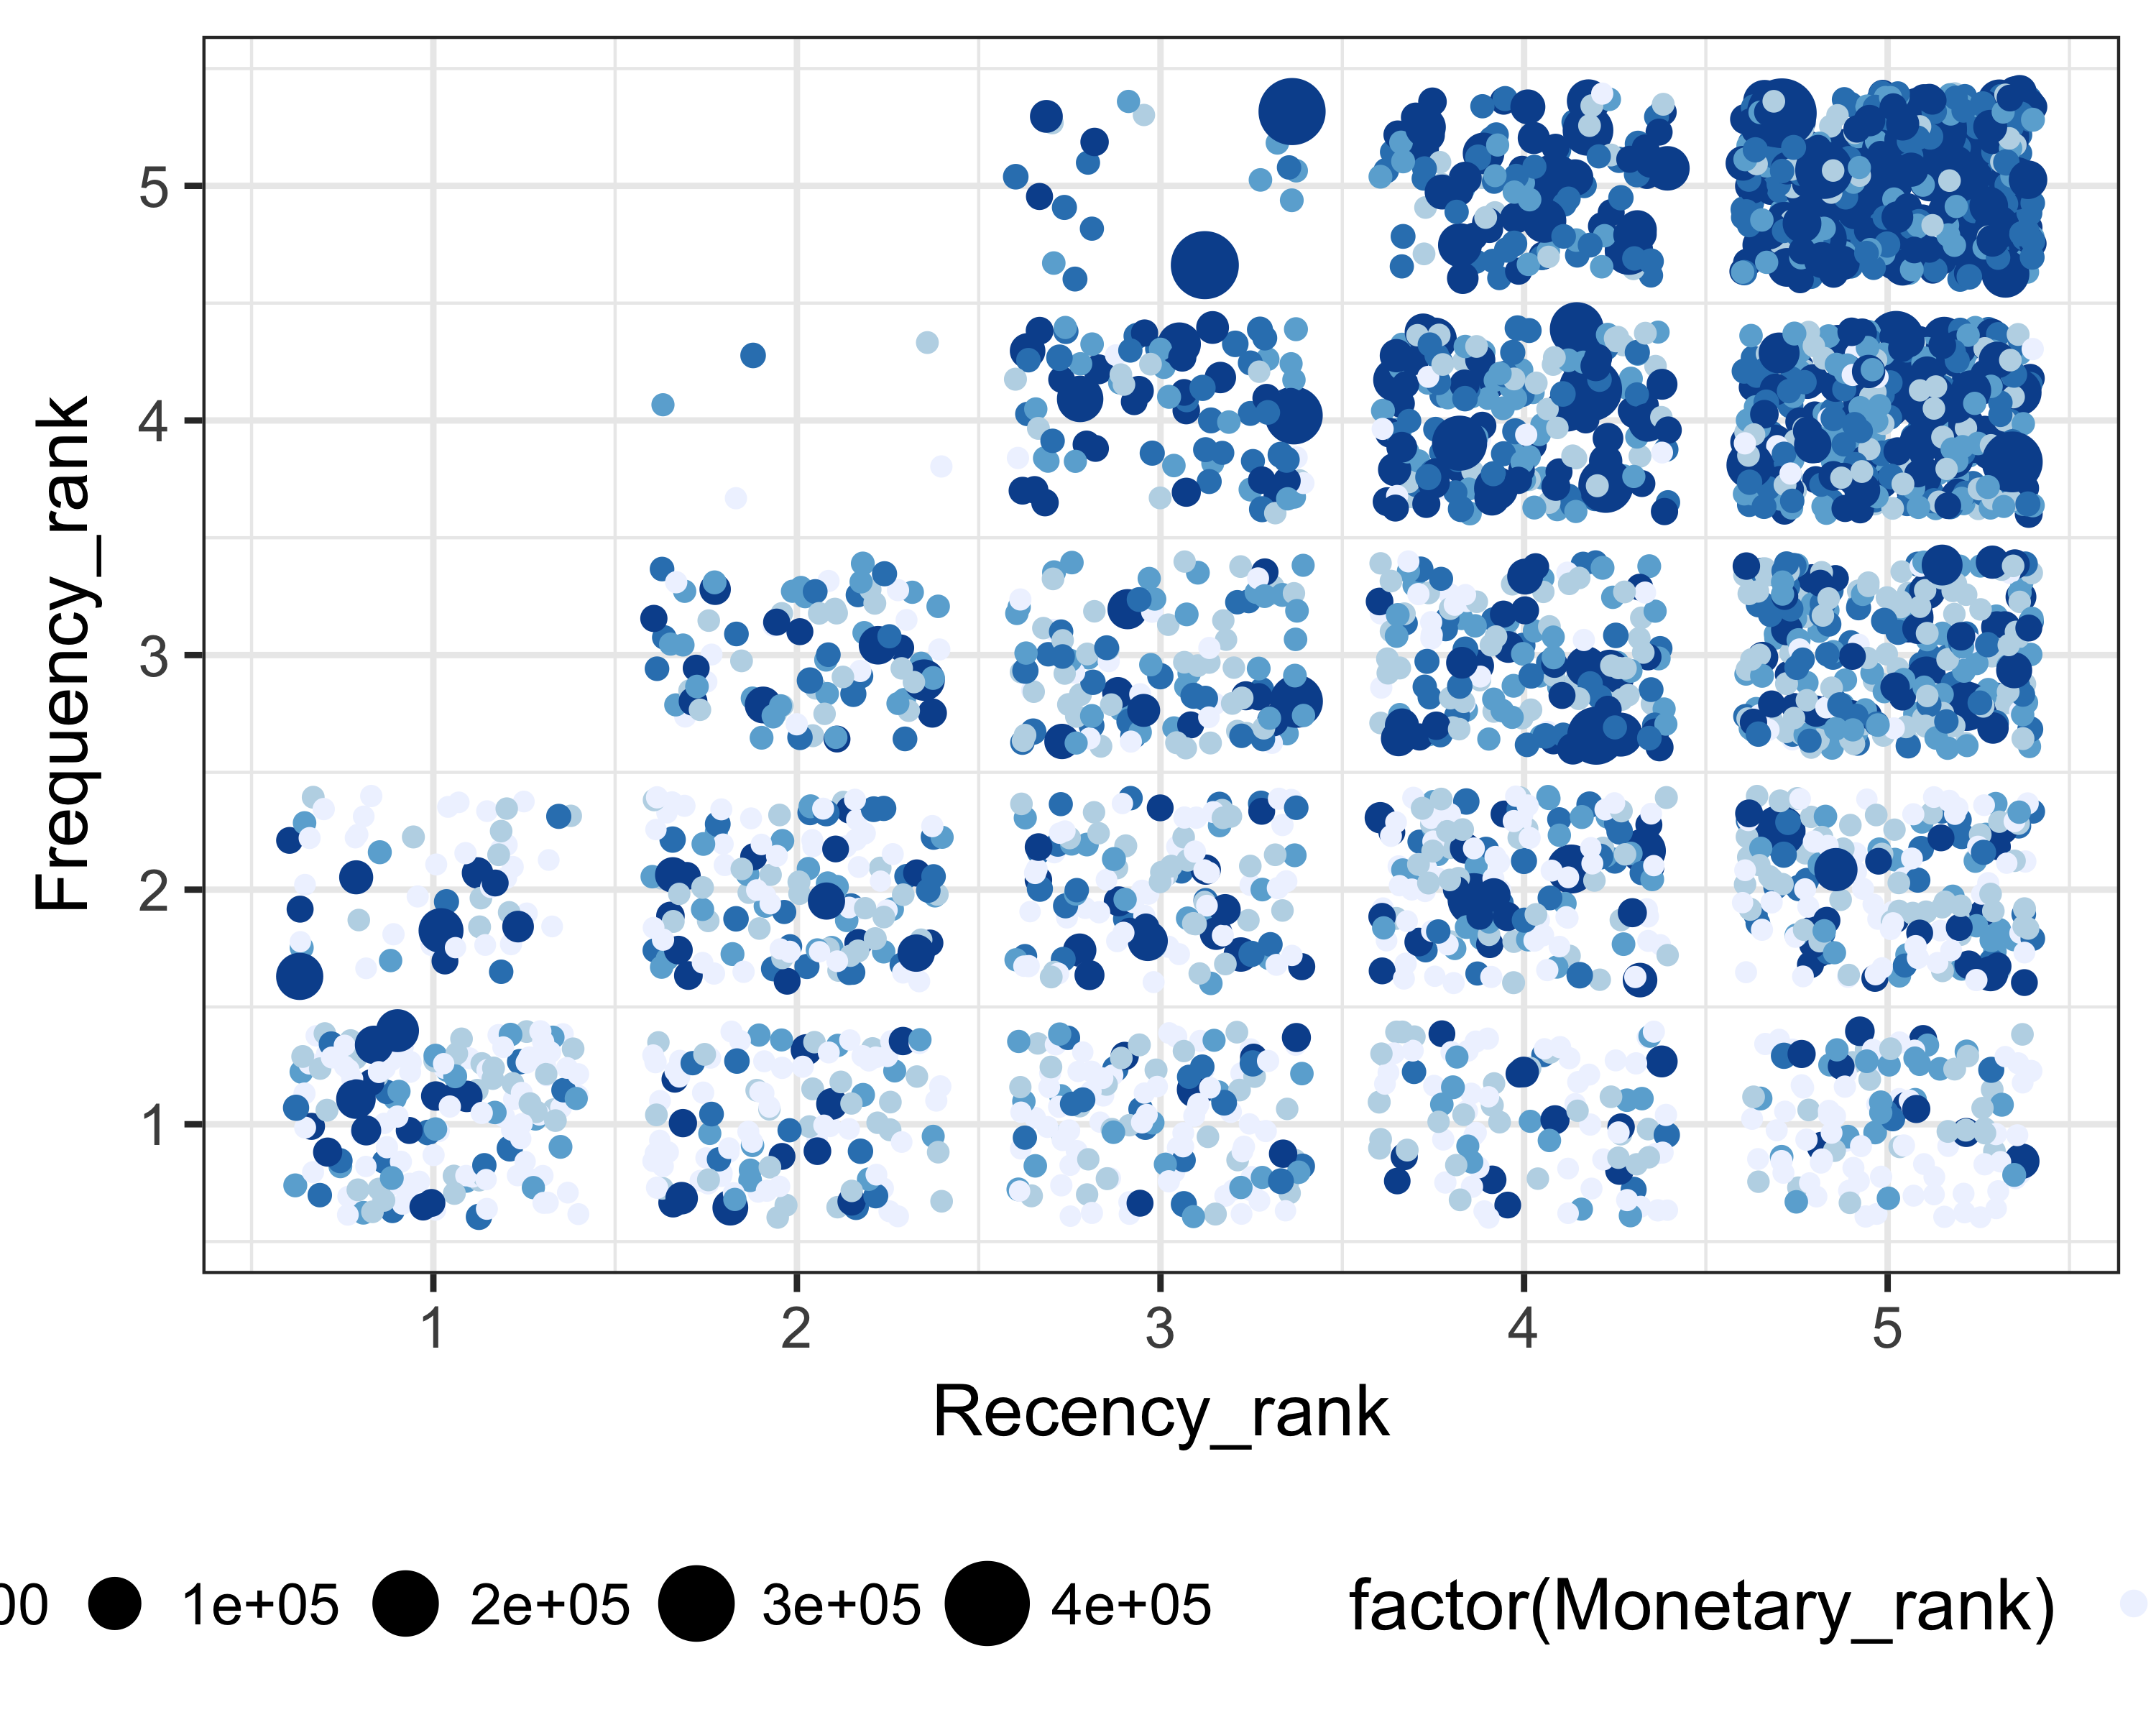 Recency rank, frequency rank, and giving